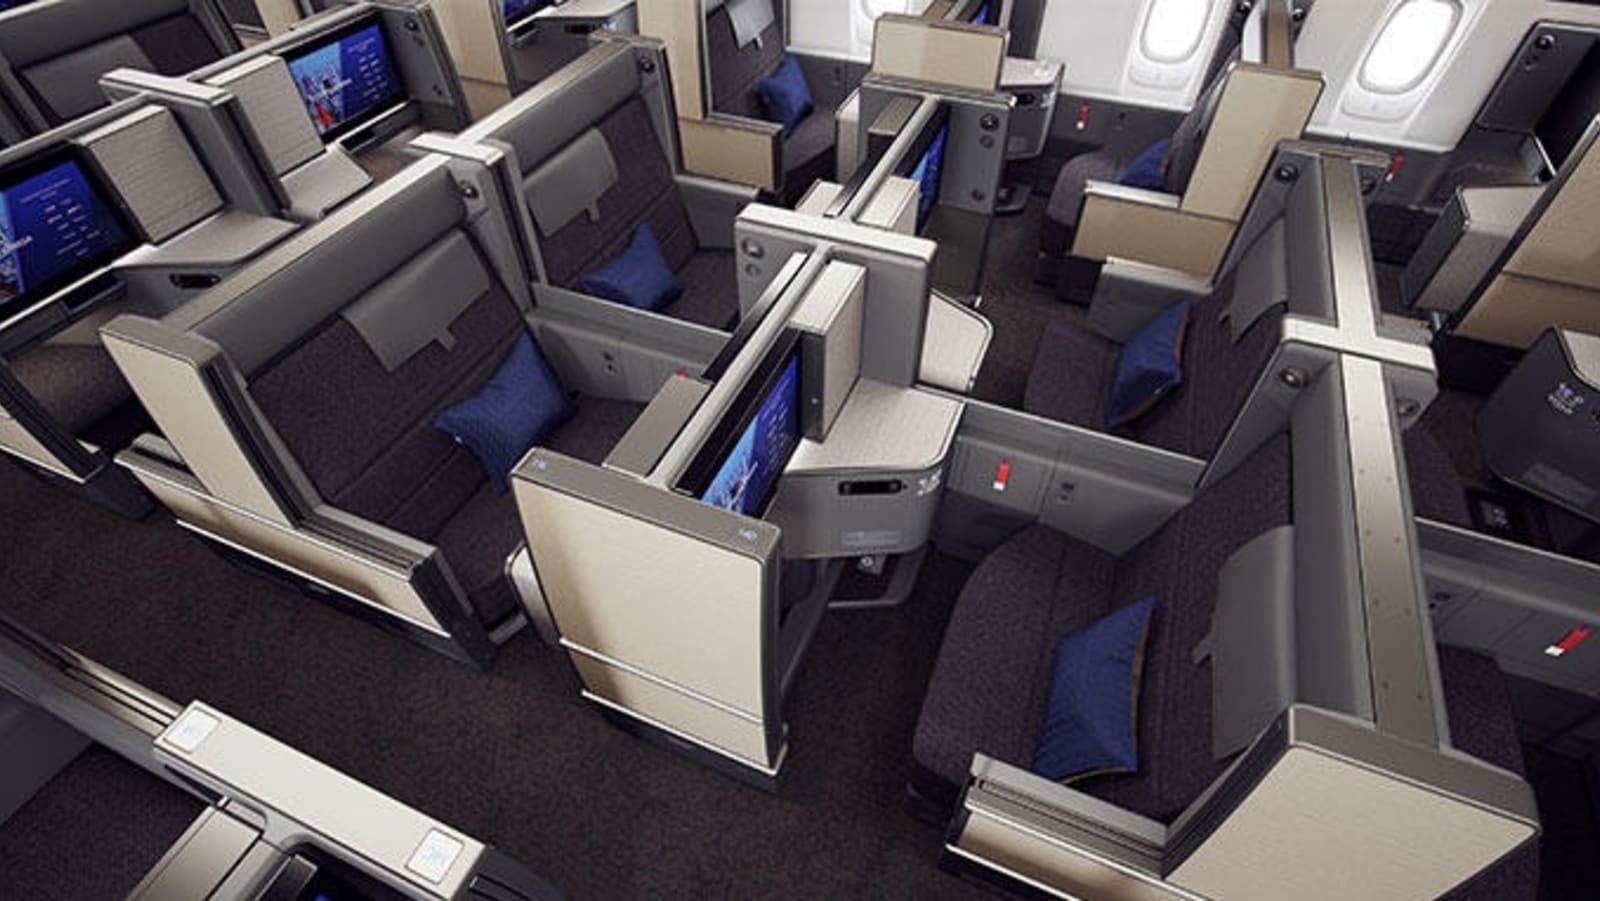 business-class-whole-image-ps.jpg